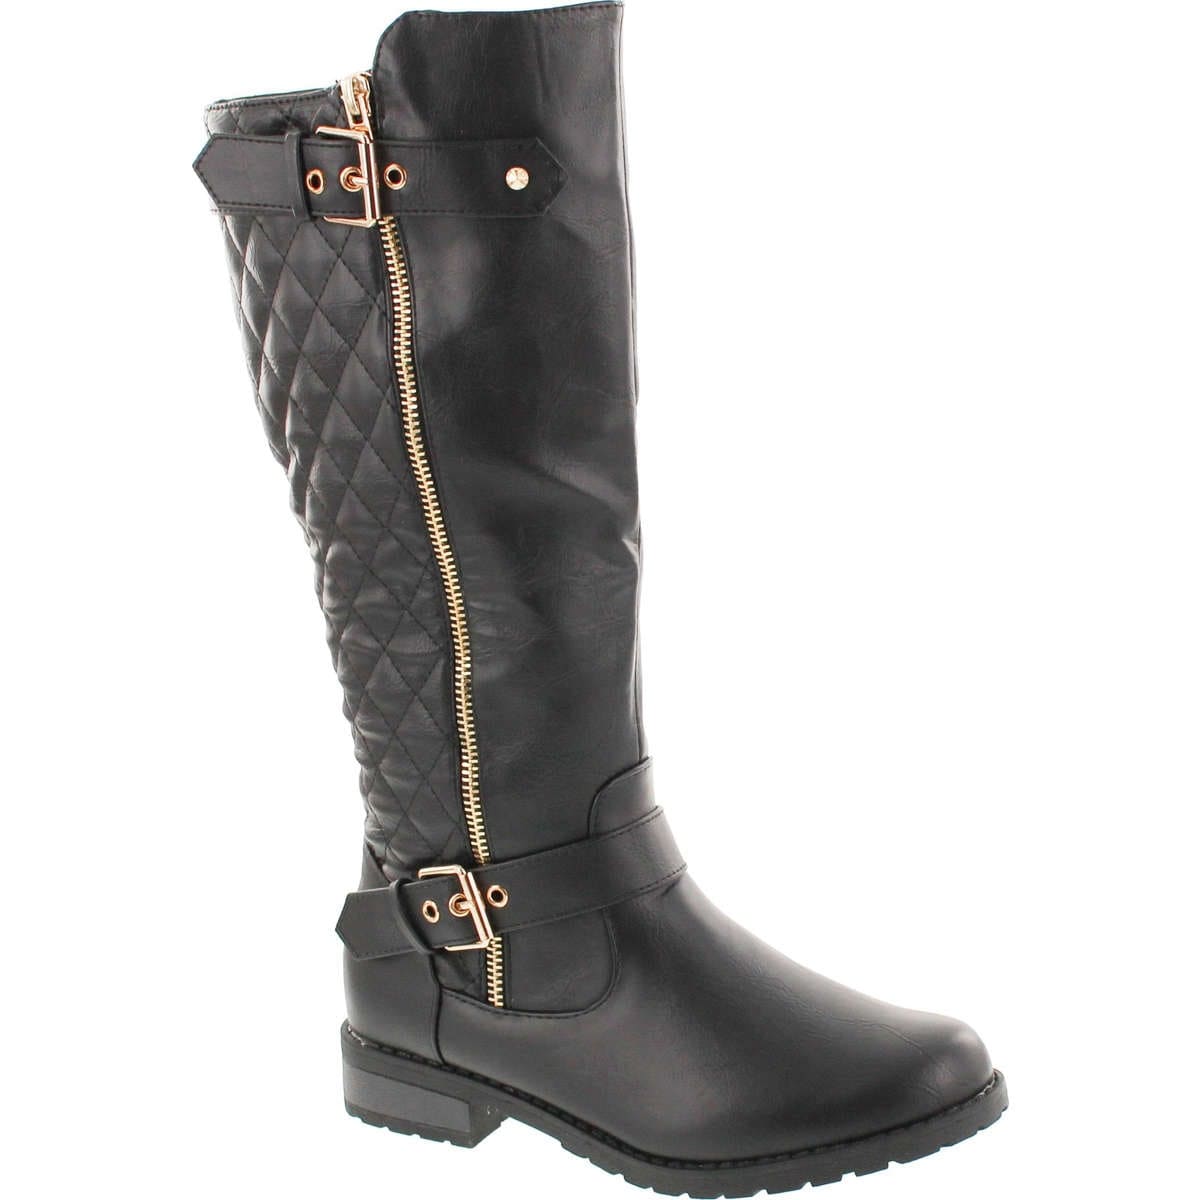 quilted riding boots